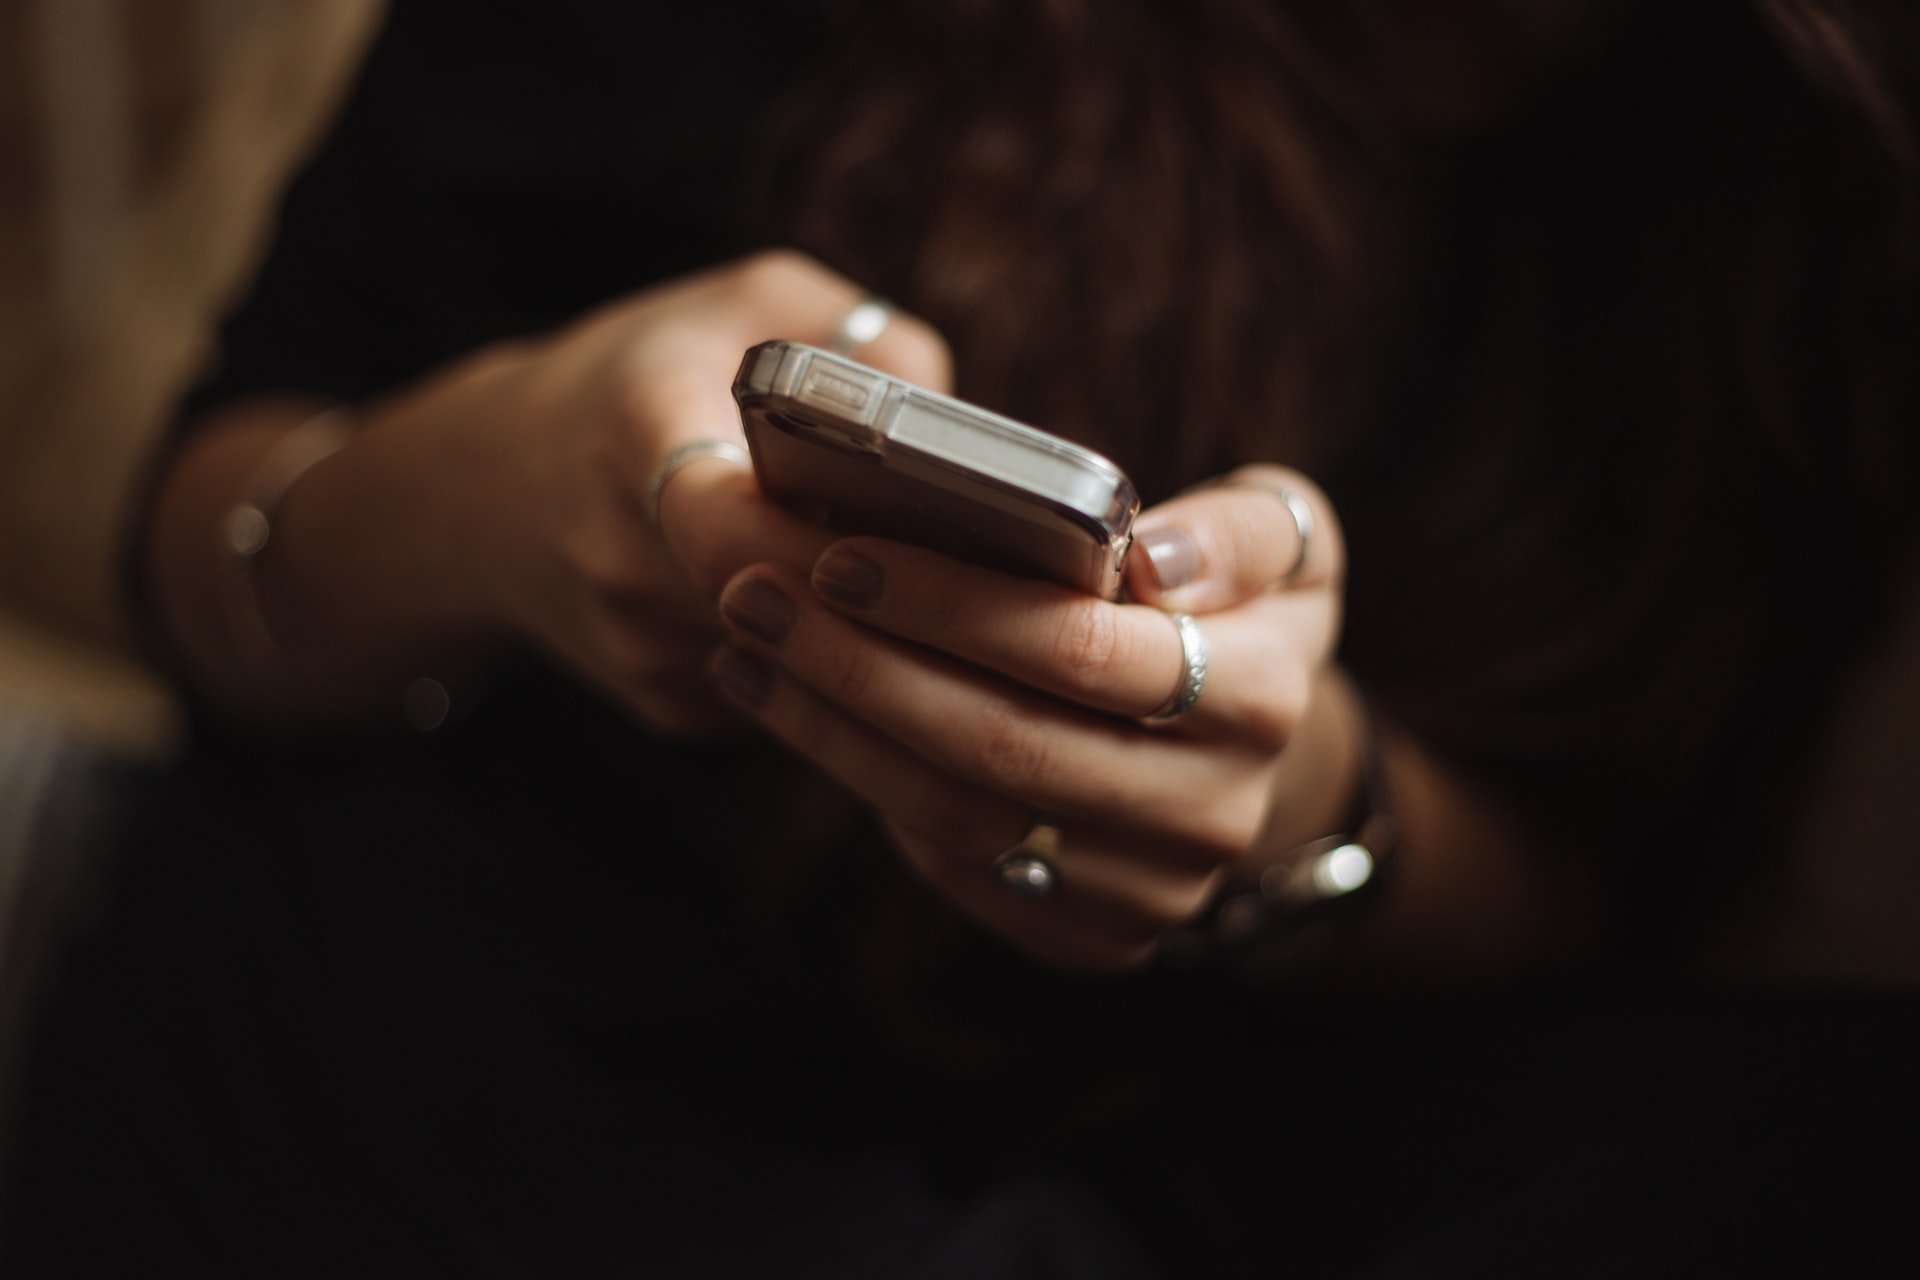 Julie texted OP about her special diet | Source: Unsplash